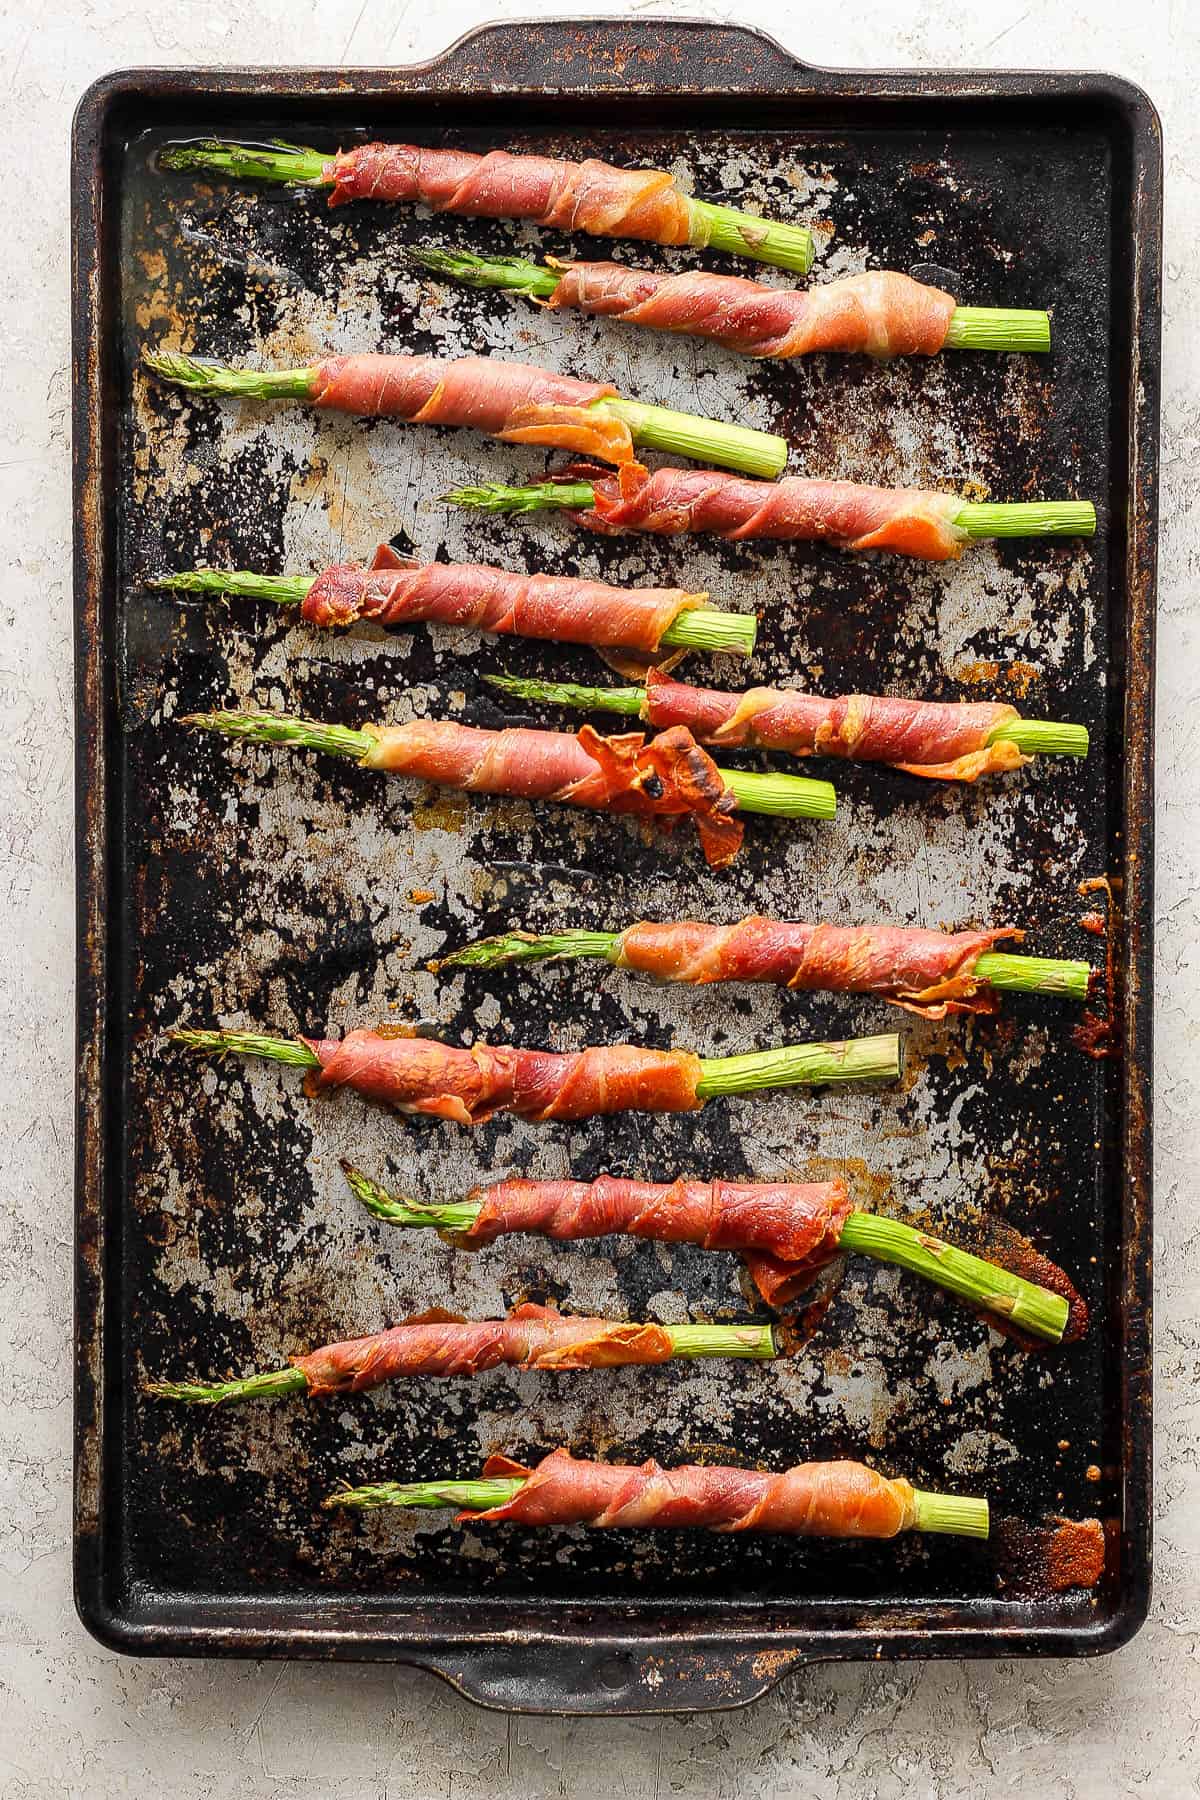 Wrapped asparagus on a sheet pan after baking.